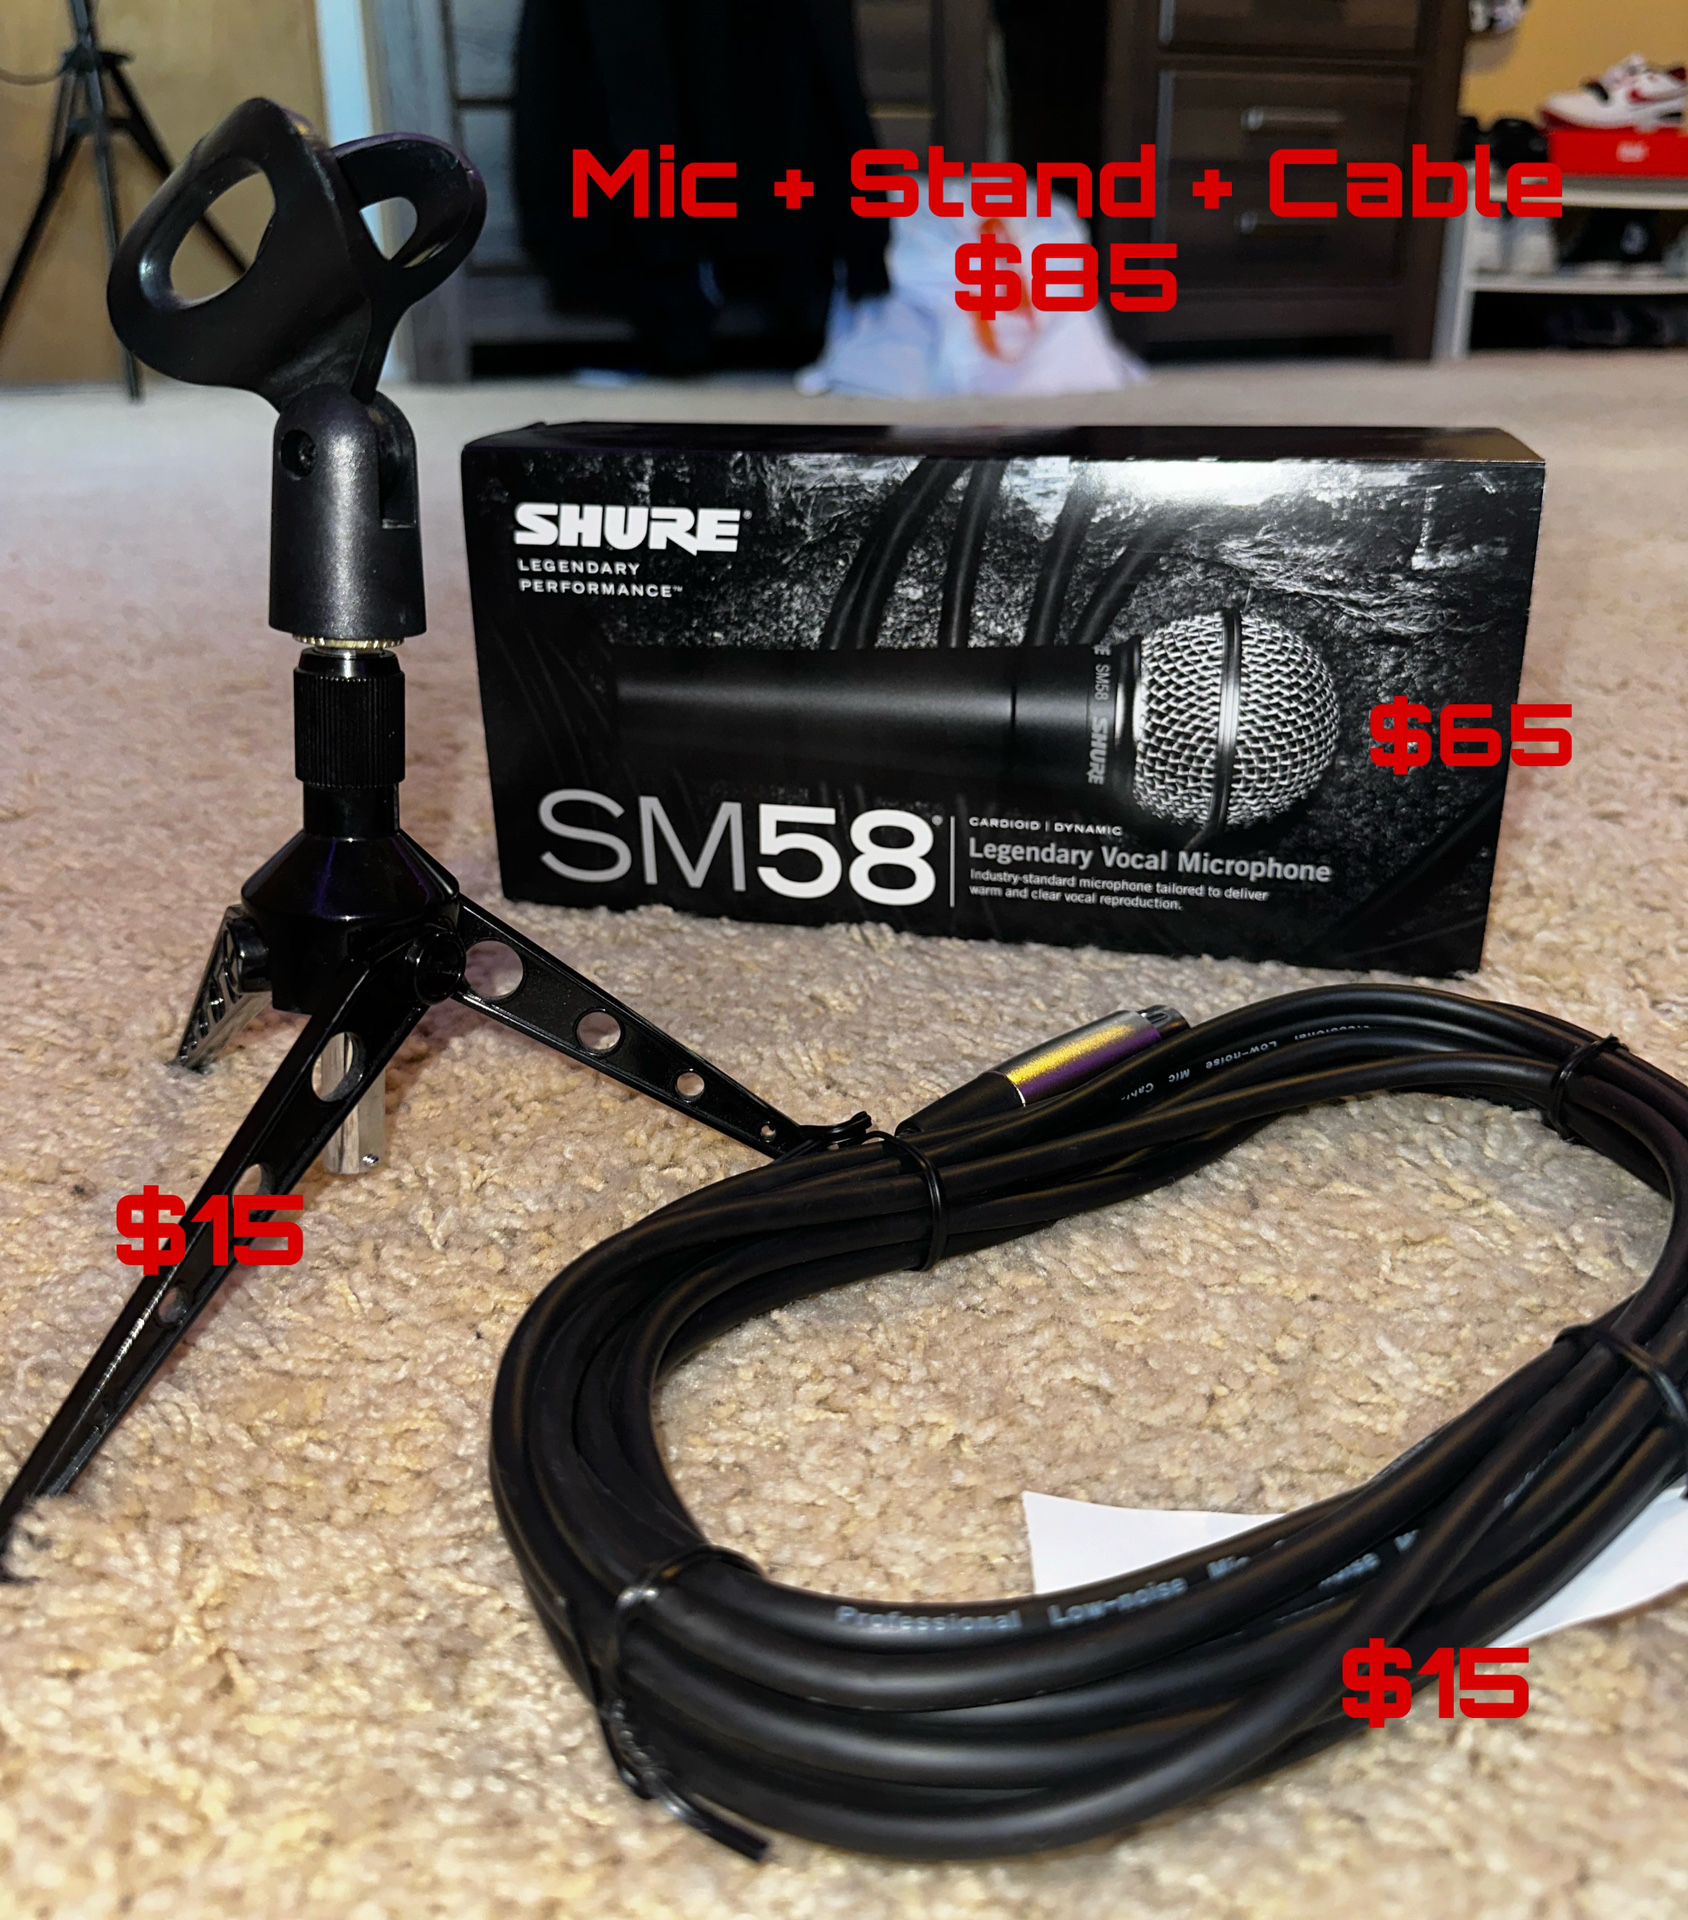 Shure SM58 Microphone, Desktop Mic Stand And Cable